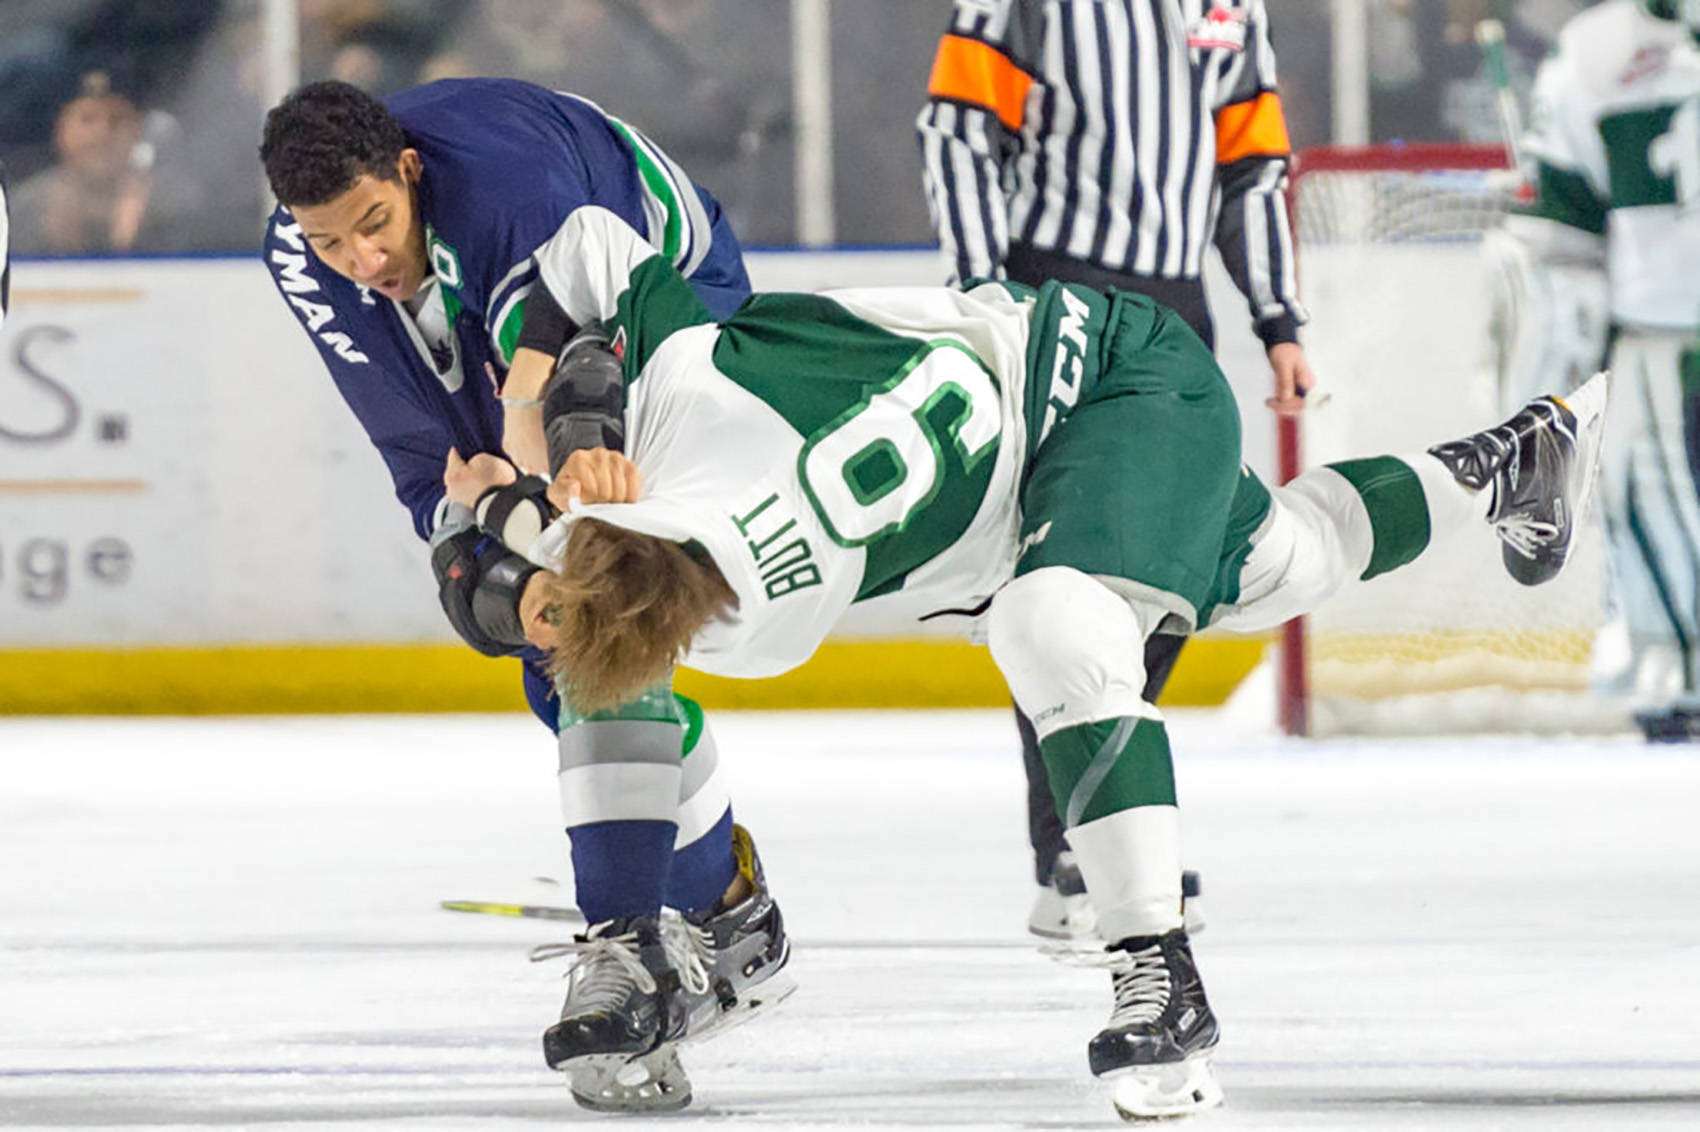 Thunderbirds defenseman Aaron Hyman scuffles with Silvertips right winger Dawson Butt during WHL play at the accesso ShoWare Center on Saturday night. COURTESY PHOTO, Brian Liesse, T-Birds